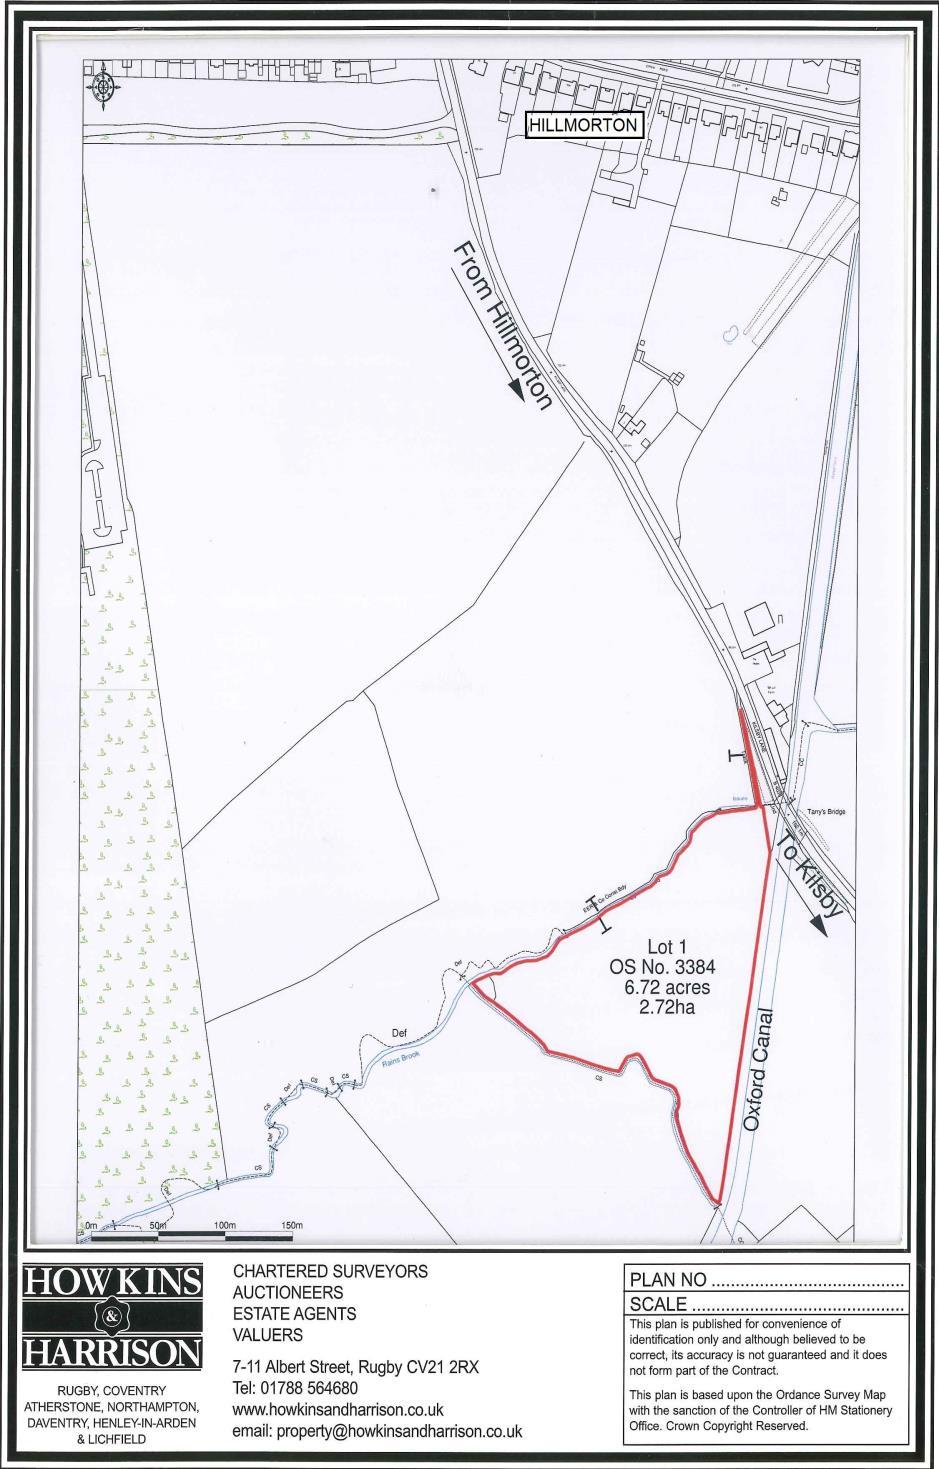 WARWICKSHIRE REF. GK.575 LAND AT KILSBY LANE RUGBY DR I WHITCROFT Sale of Approximately 6 Acres of Grass 1 3384 6.72 2.